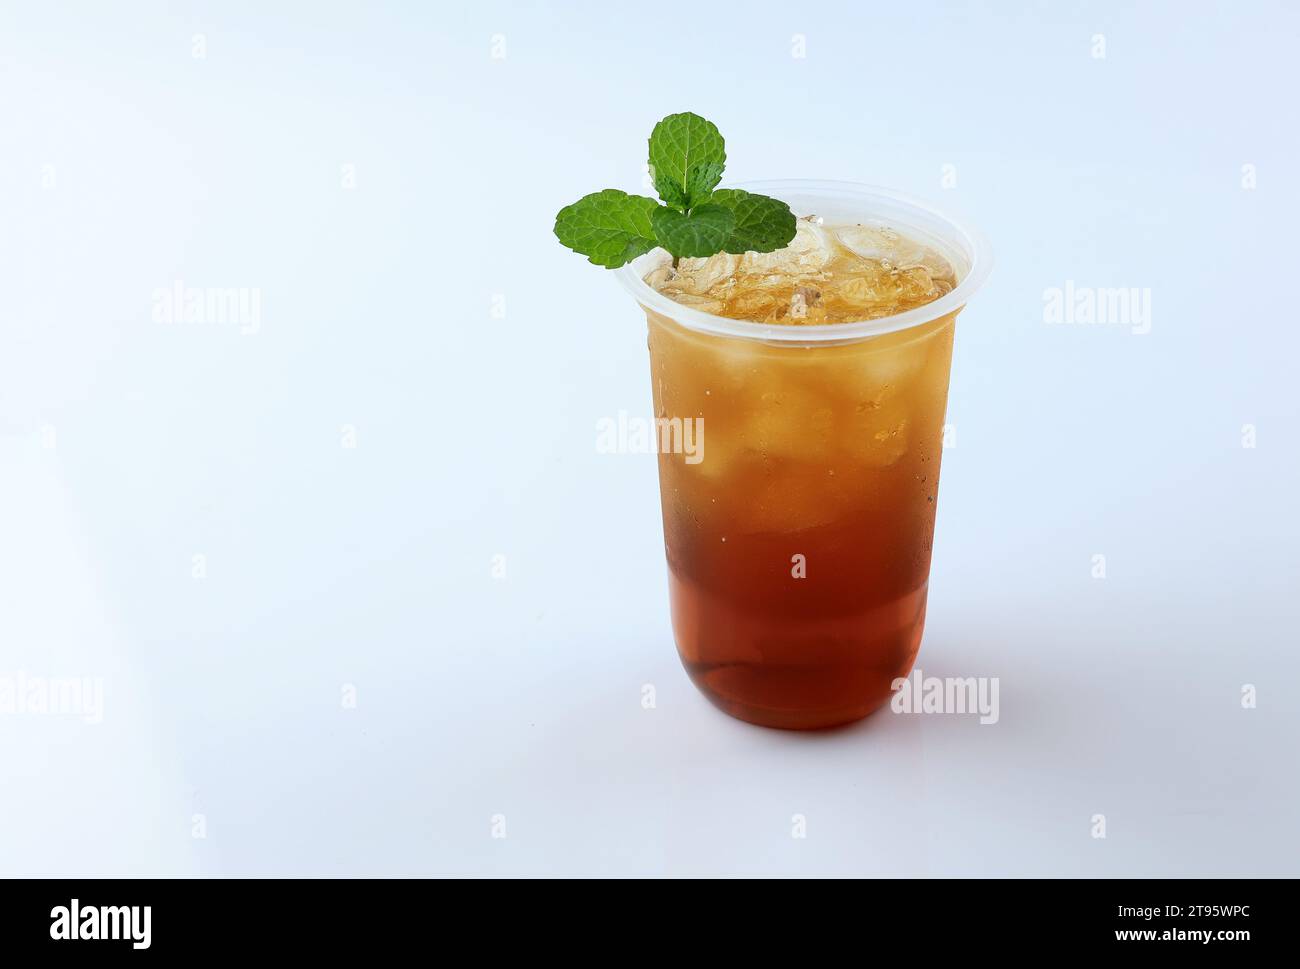 Iced Tea or Es Teh with Mint Leaf Isolated on White Background. Fresh Summer Drink Stock Photo